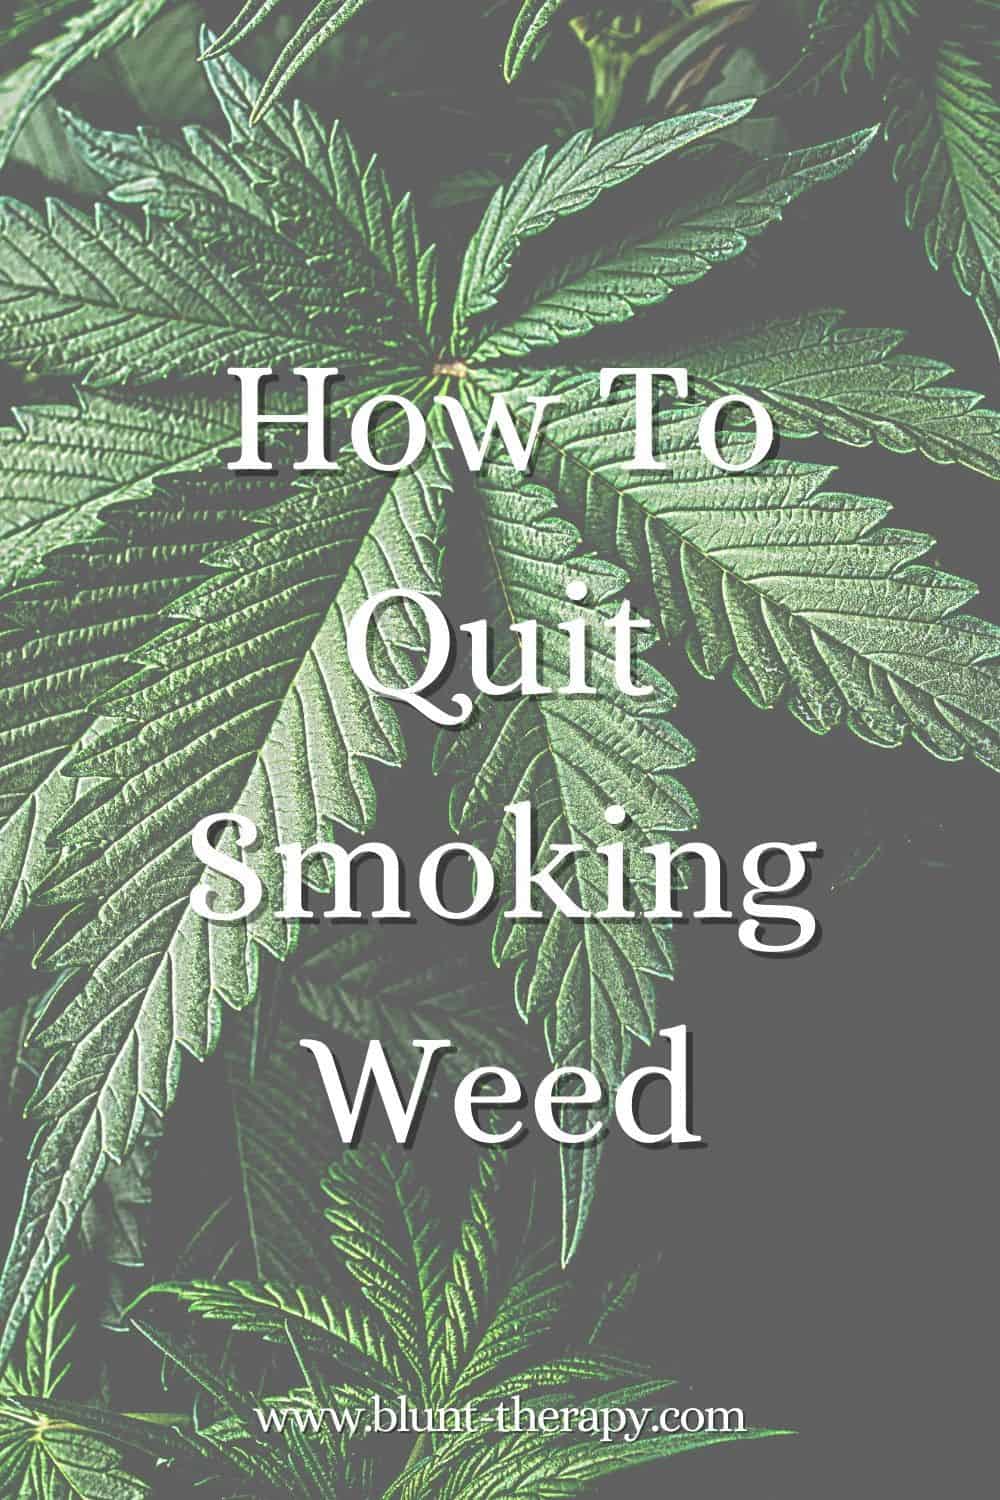 How To Quit Smoking Weed: 7 Ways To Kick The Habit